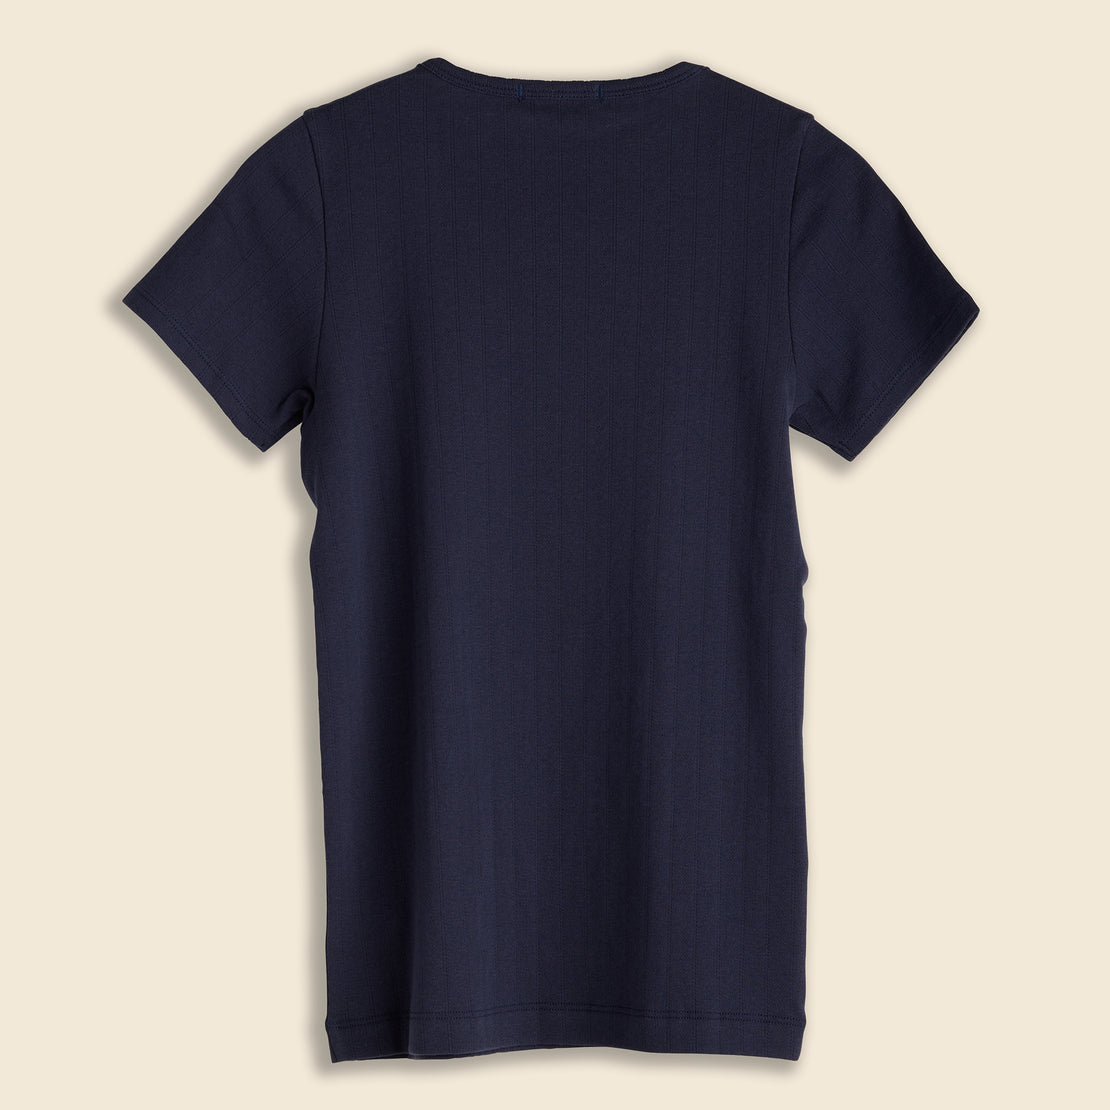 Remy Pointelle Tee - Night Sky - Alex Mill - STAG Provisions - W - Tops - S/S Tee